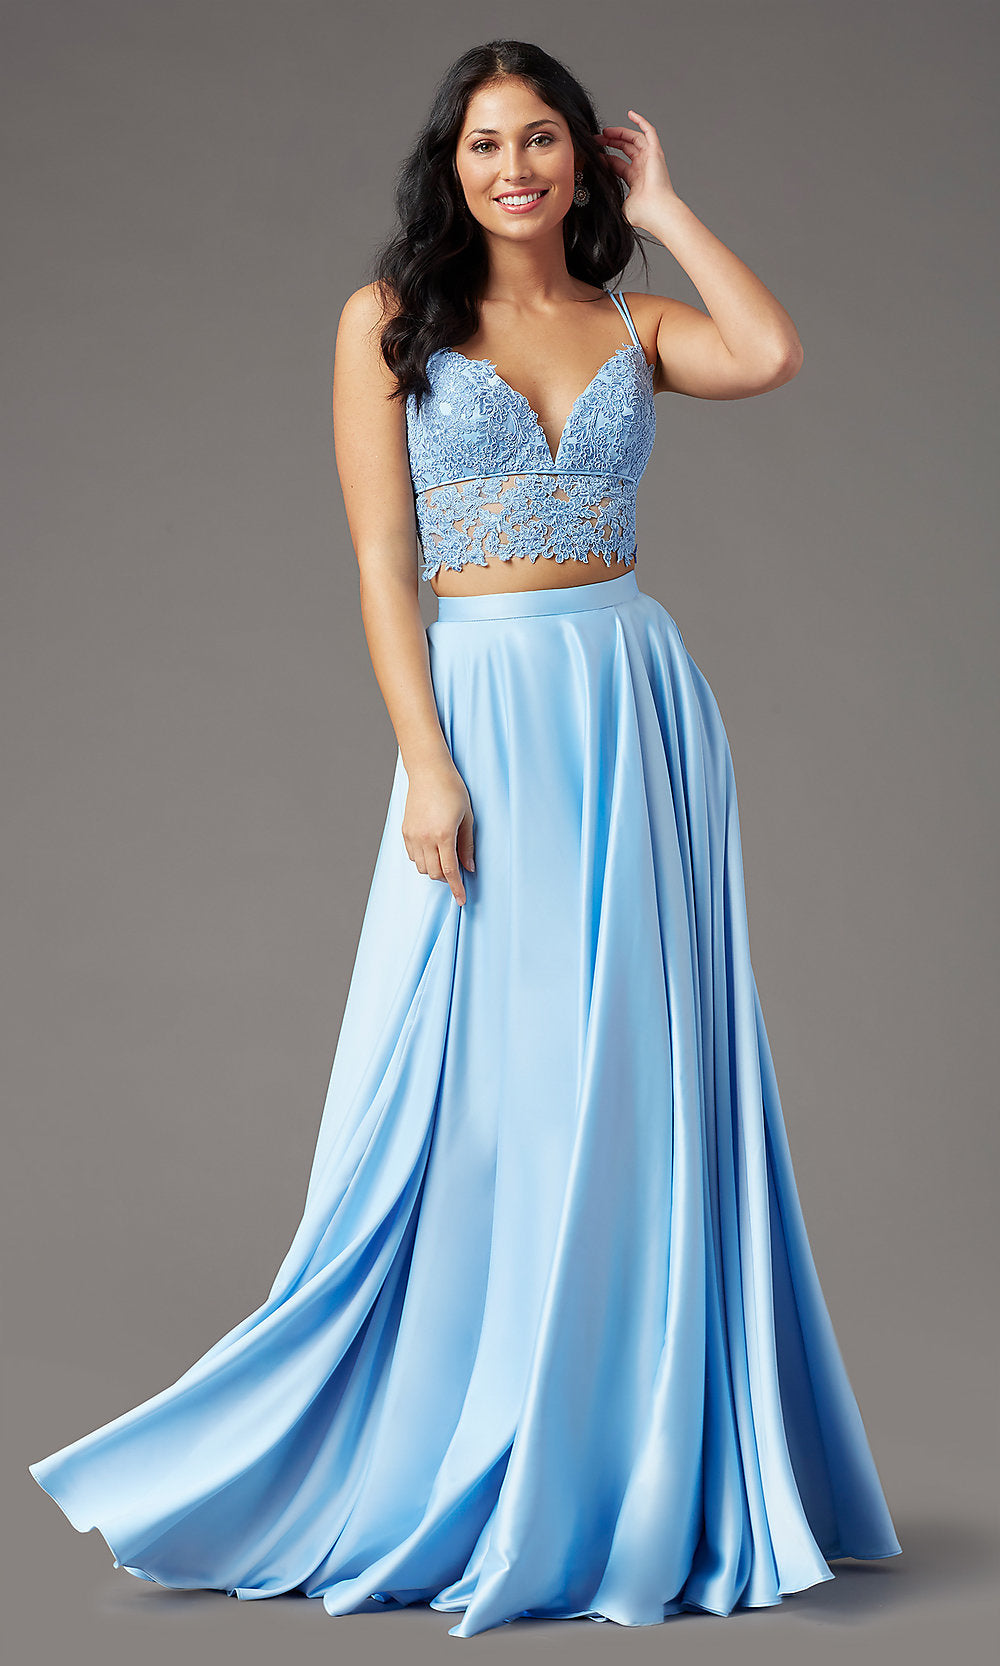  Faux-Wrap Long Two-Piece Prom Dress by PromGirl